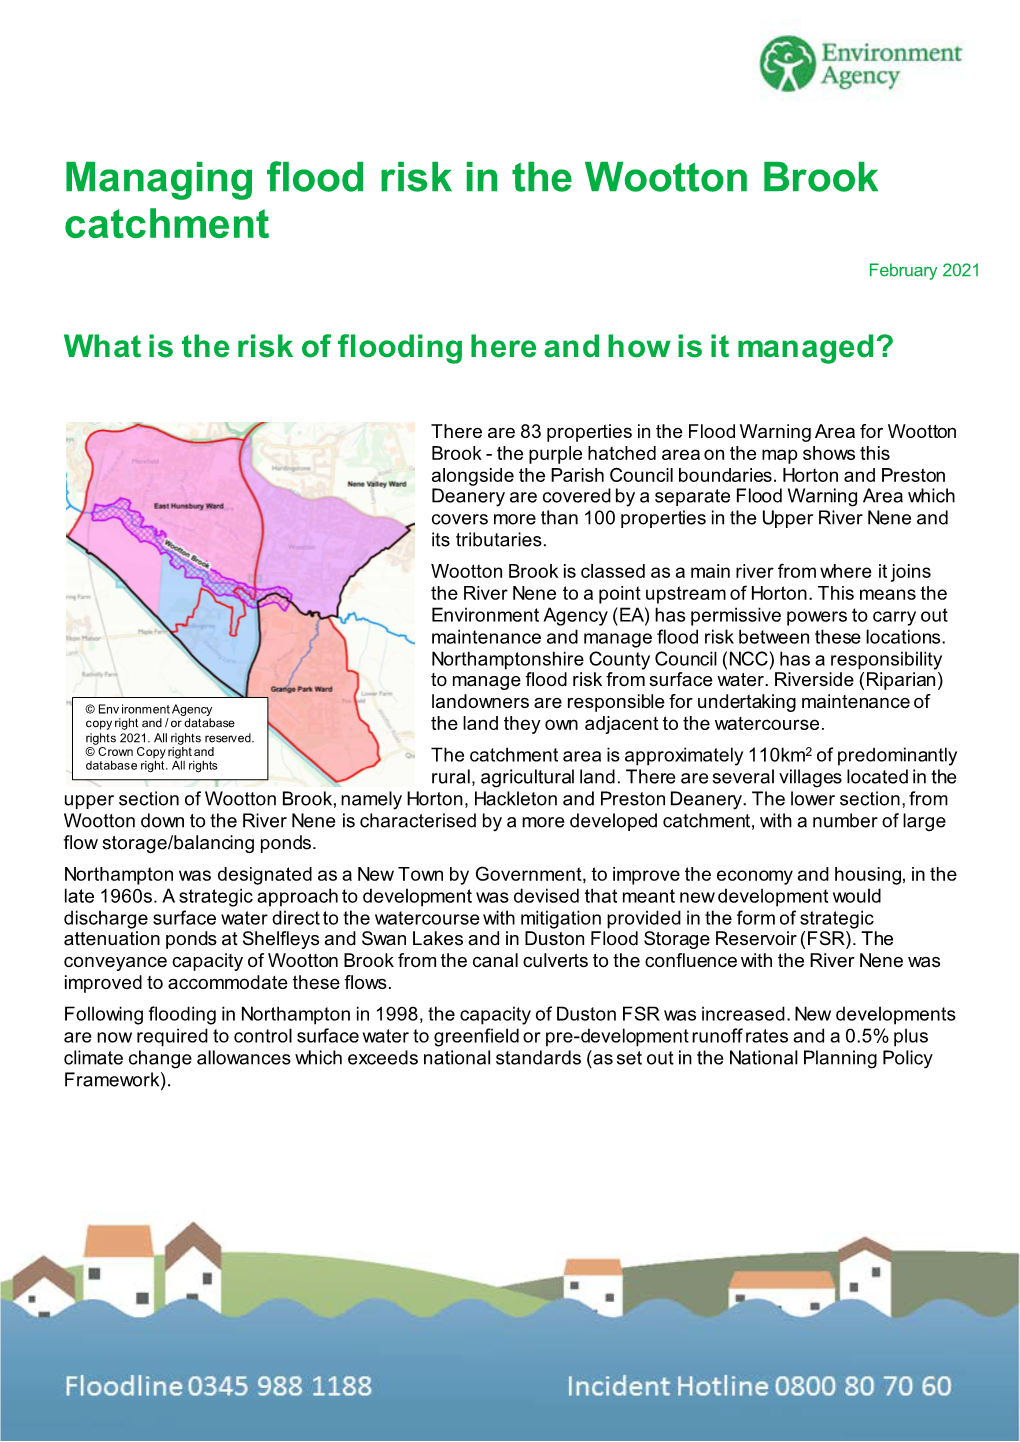 Managing Flood Risk in the Wootton Brook Catchment February 2021